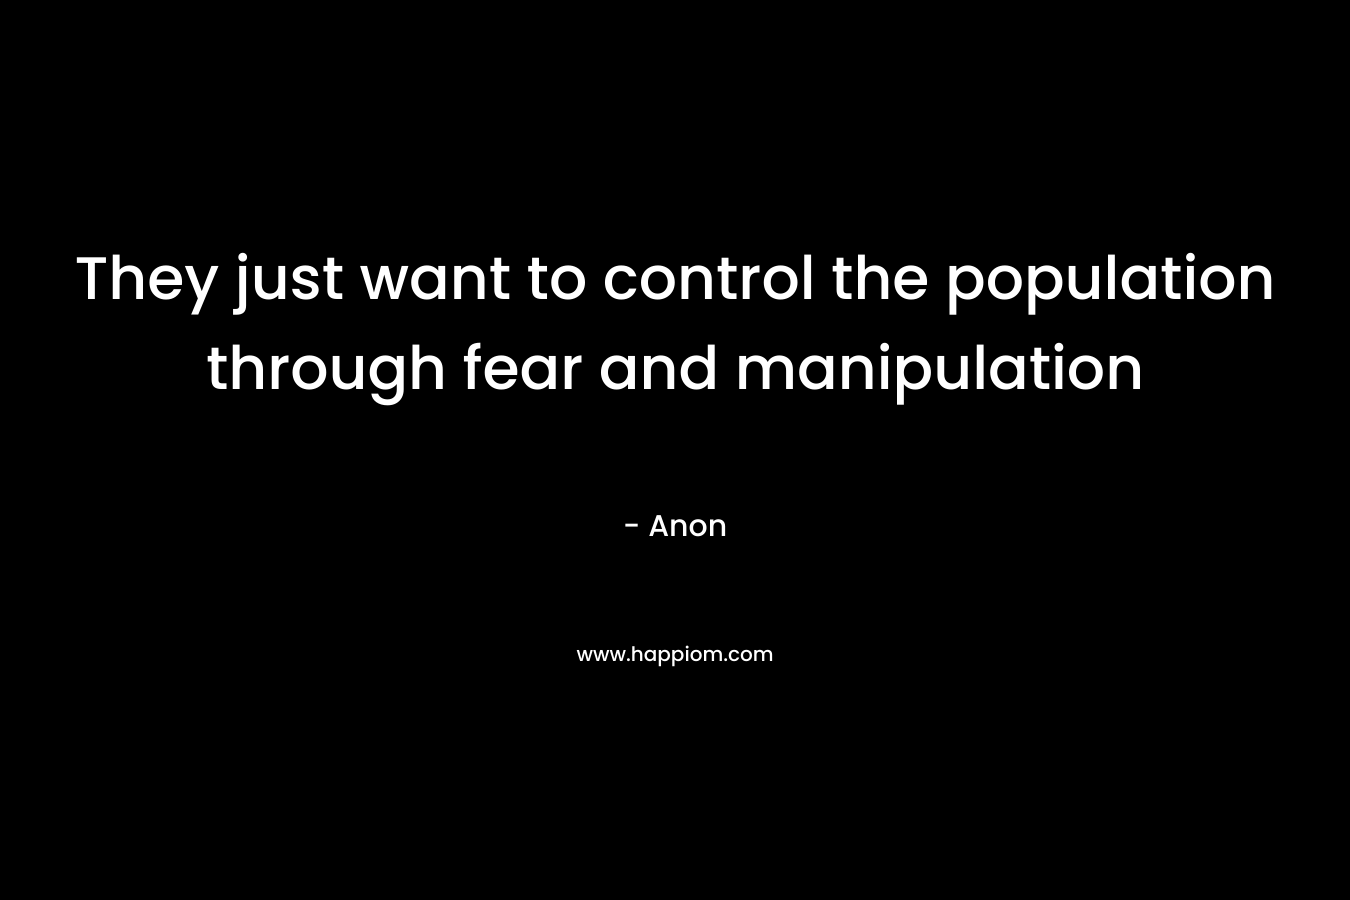 They just want to control the population through fear and manipulation – Anon